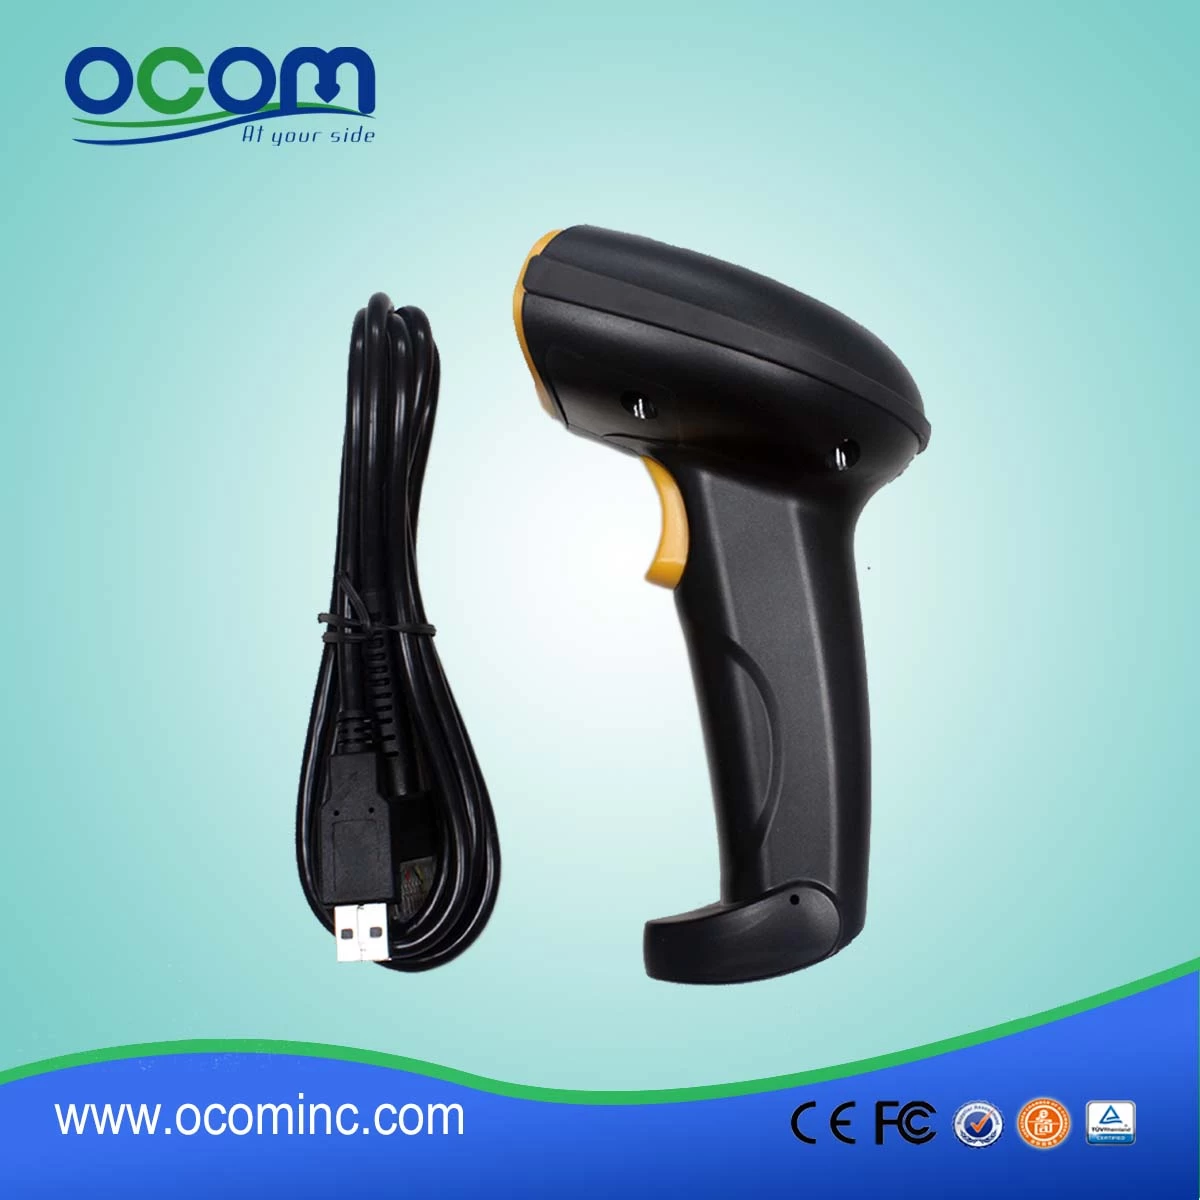 OCBS-2010: Pos QR Code Scanner Similiar With Honeywell Barcode Scanner